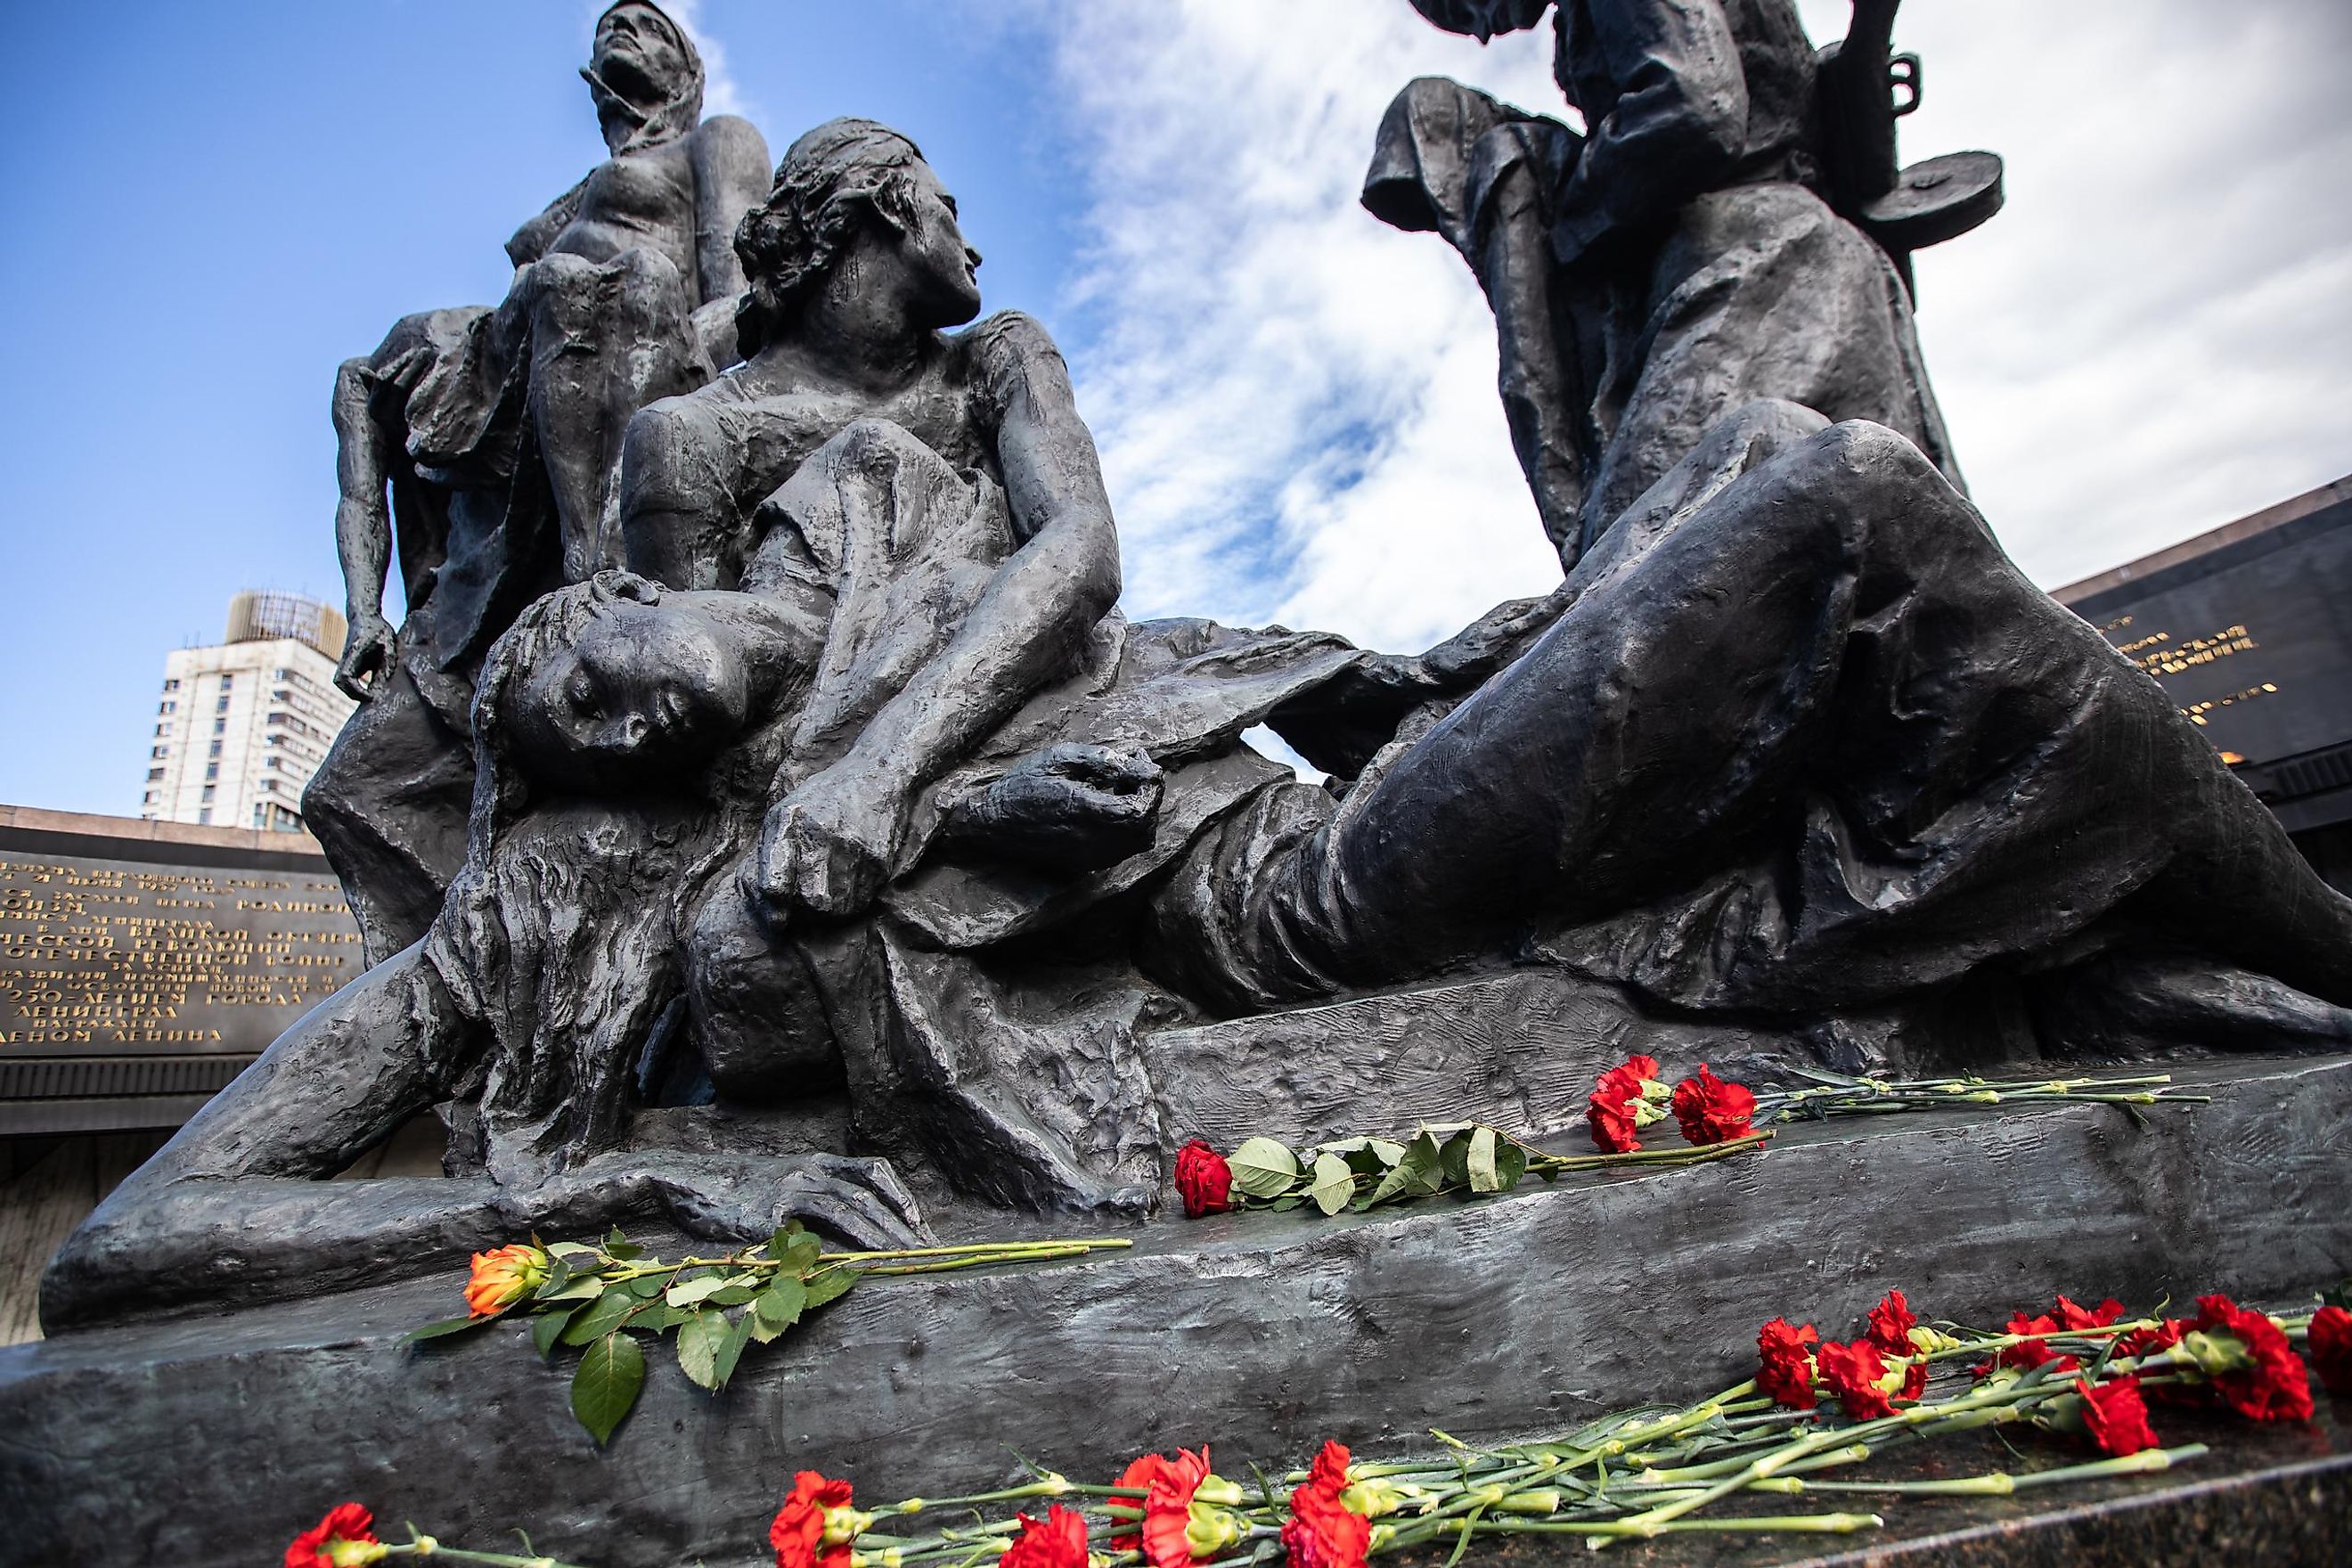 Flowers are laid at a memorial dedicated to the defenders of Leningrad in Saint Petersburg, Russia.